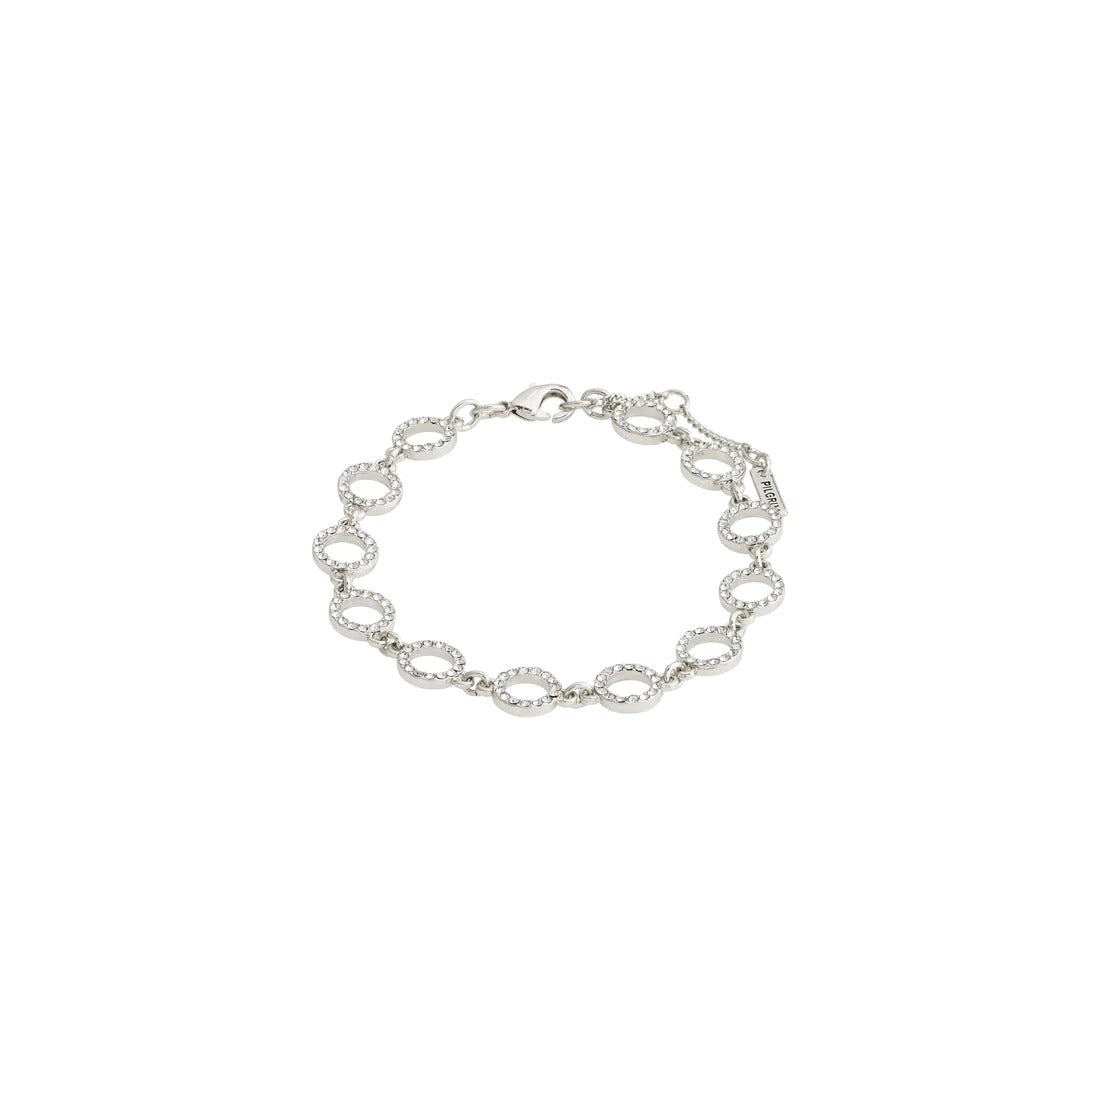 ROGUE recycled Crystal Halo Bracelet Silver-Plated